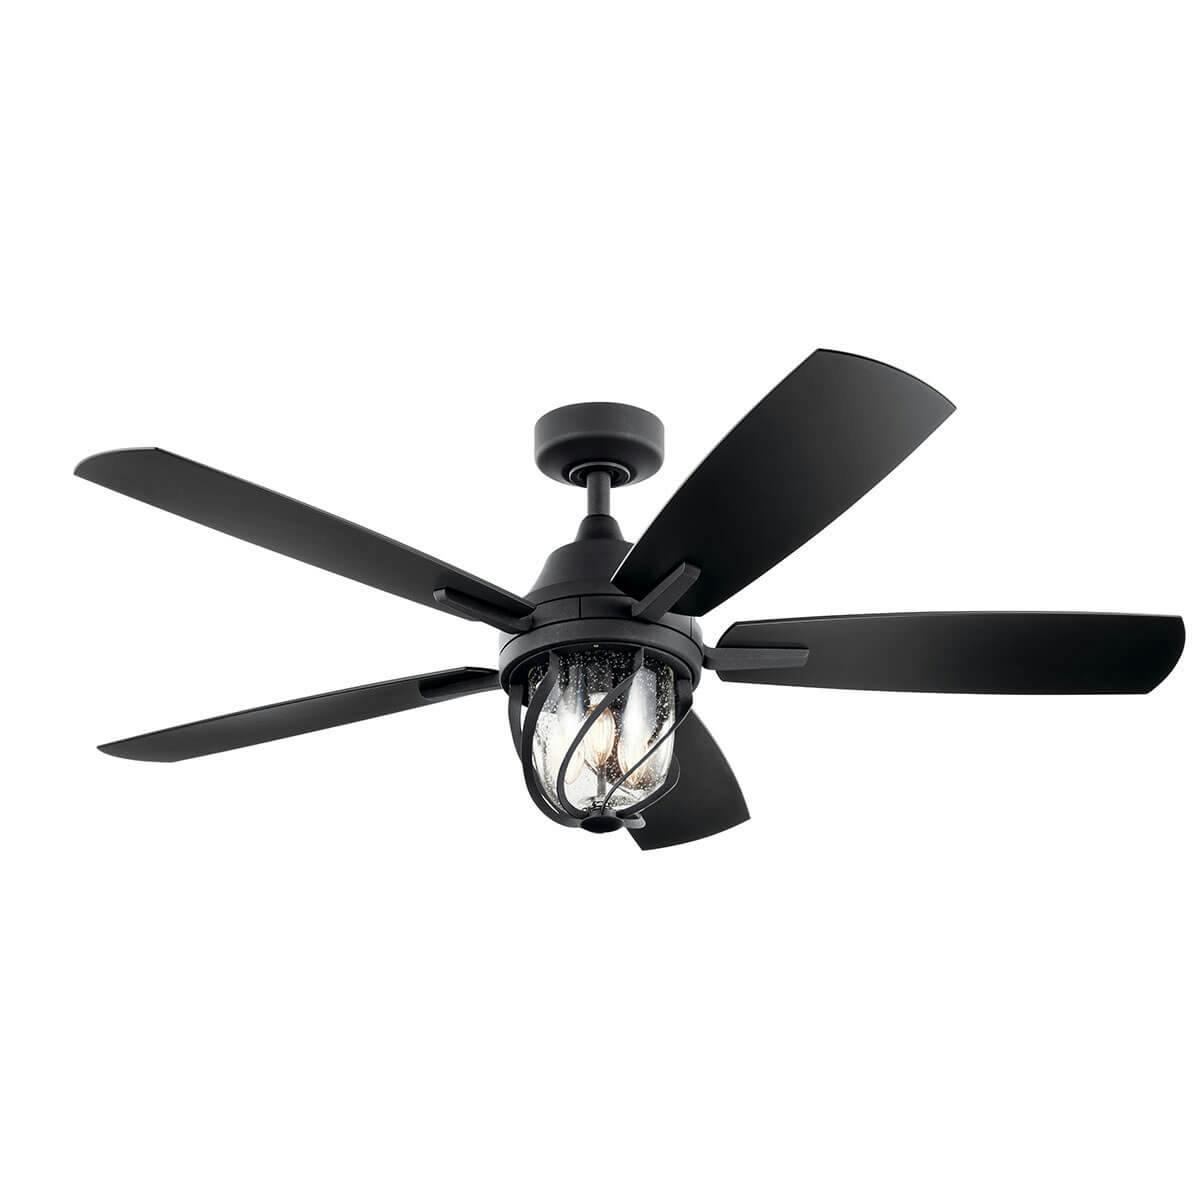 Lydra LED 52" Ceiling Fan Black on a white background